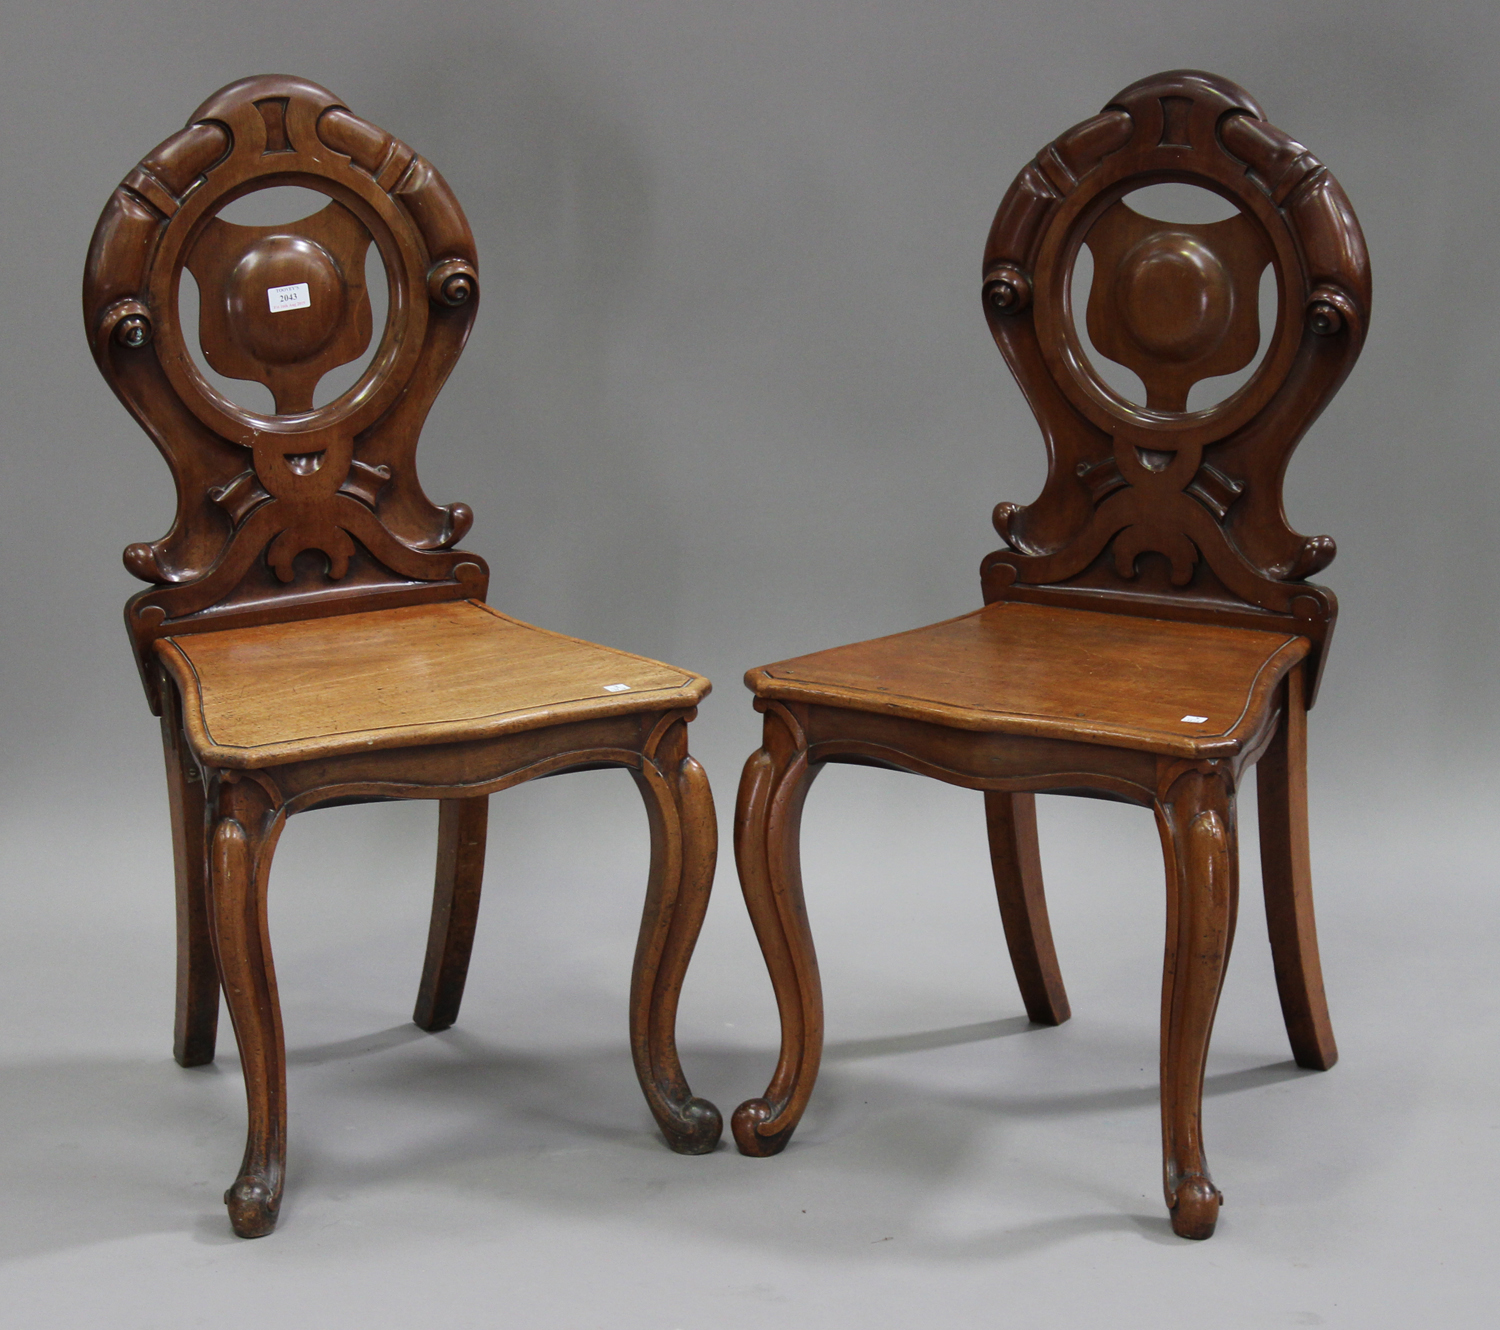 A pair of Victorian mahogany hall chairs with carved scroll decoration, the solid seats raised on